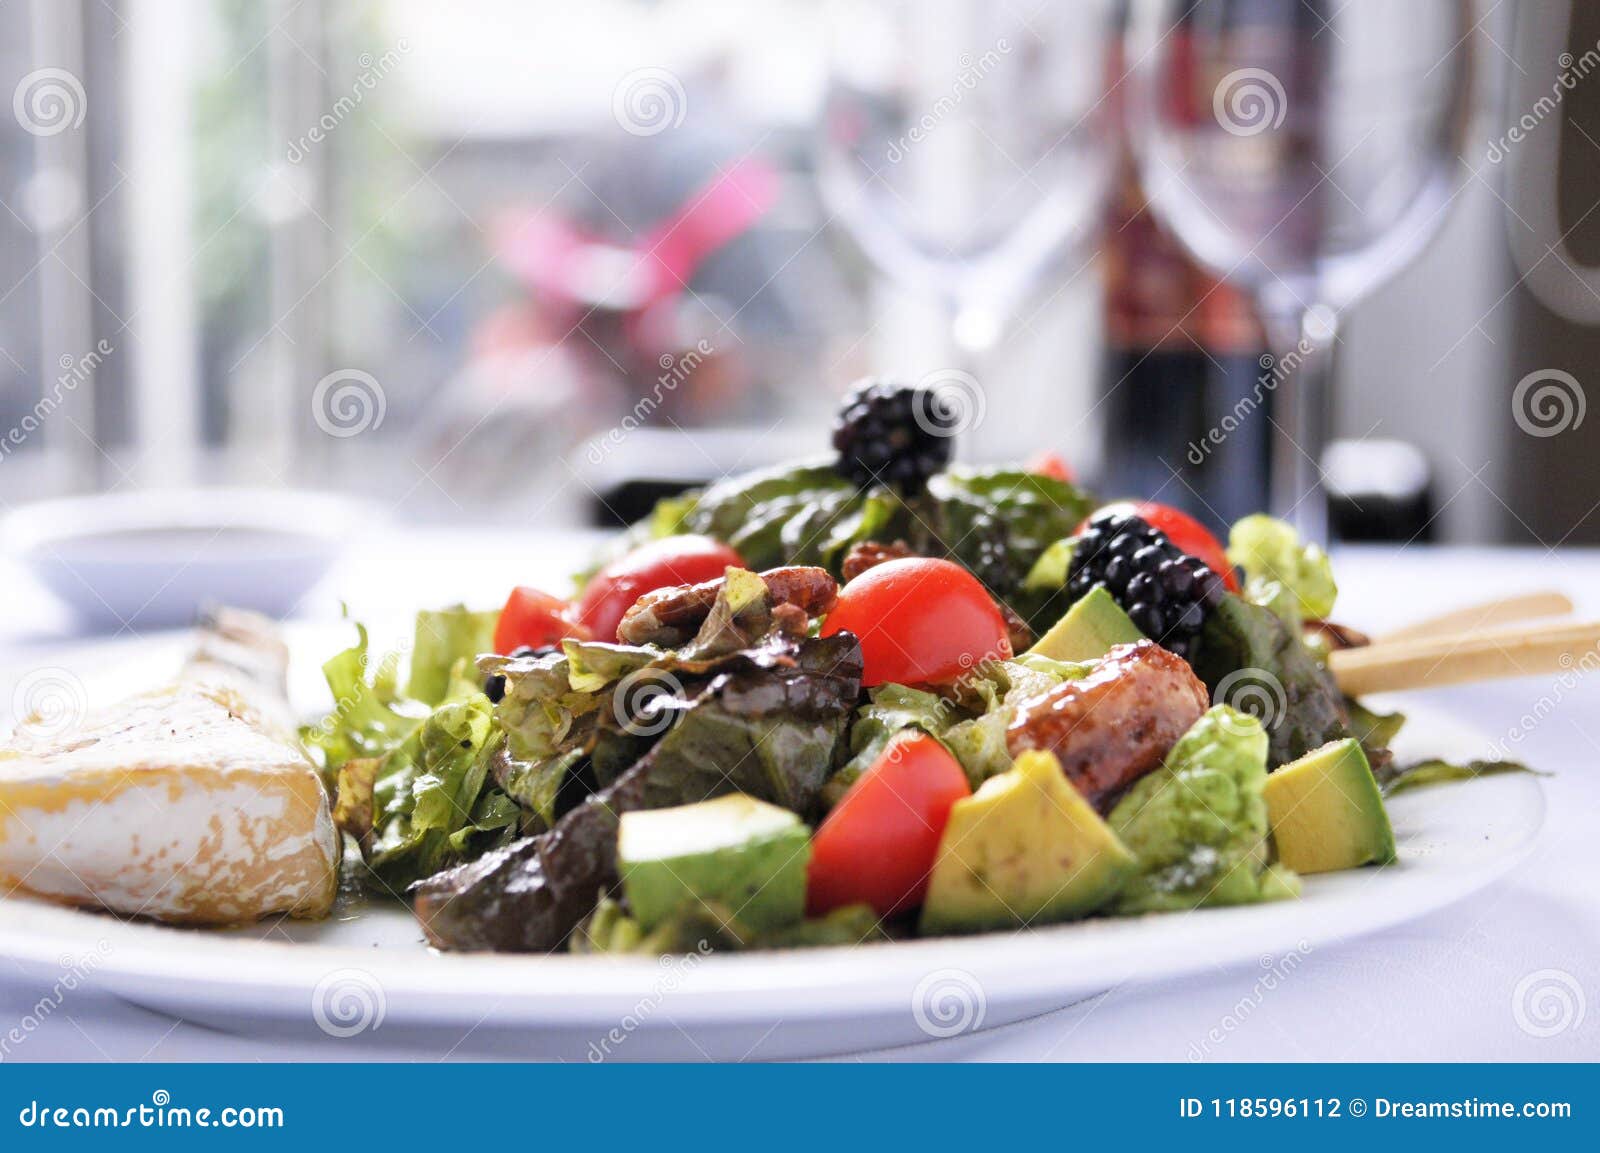 a sald with vegetables and fruit fresh and healthy food